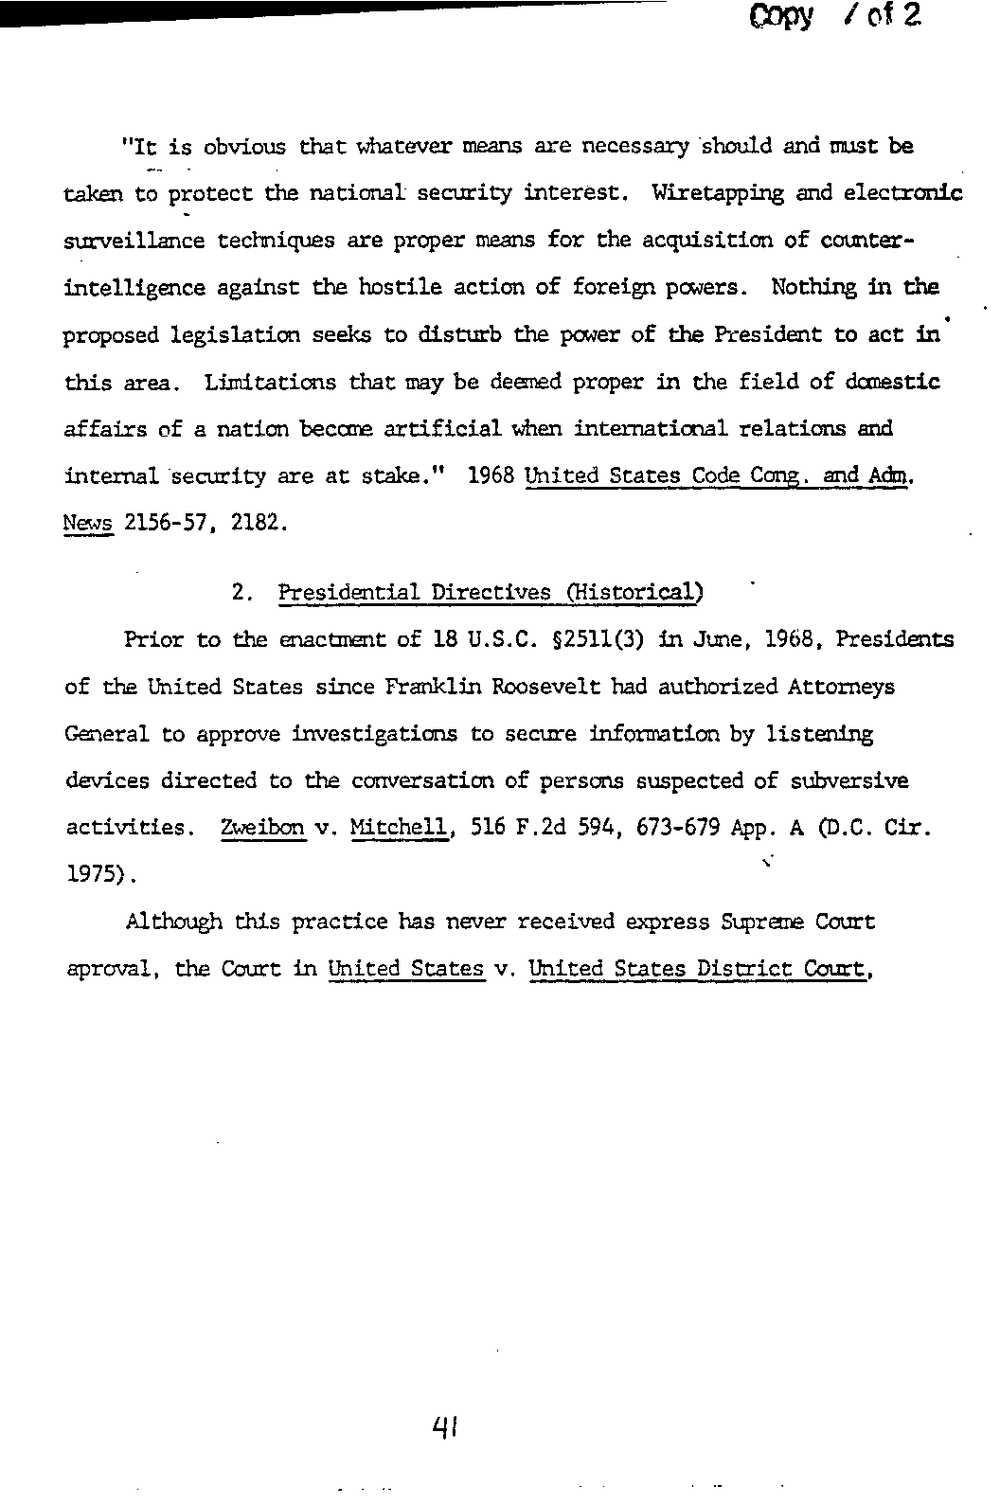 Page 49 from Report on Inquiry Into CIA Related Electronic Surveillance Activities